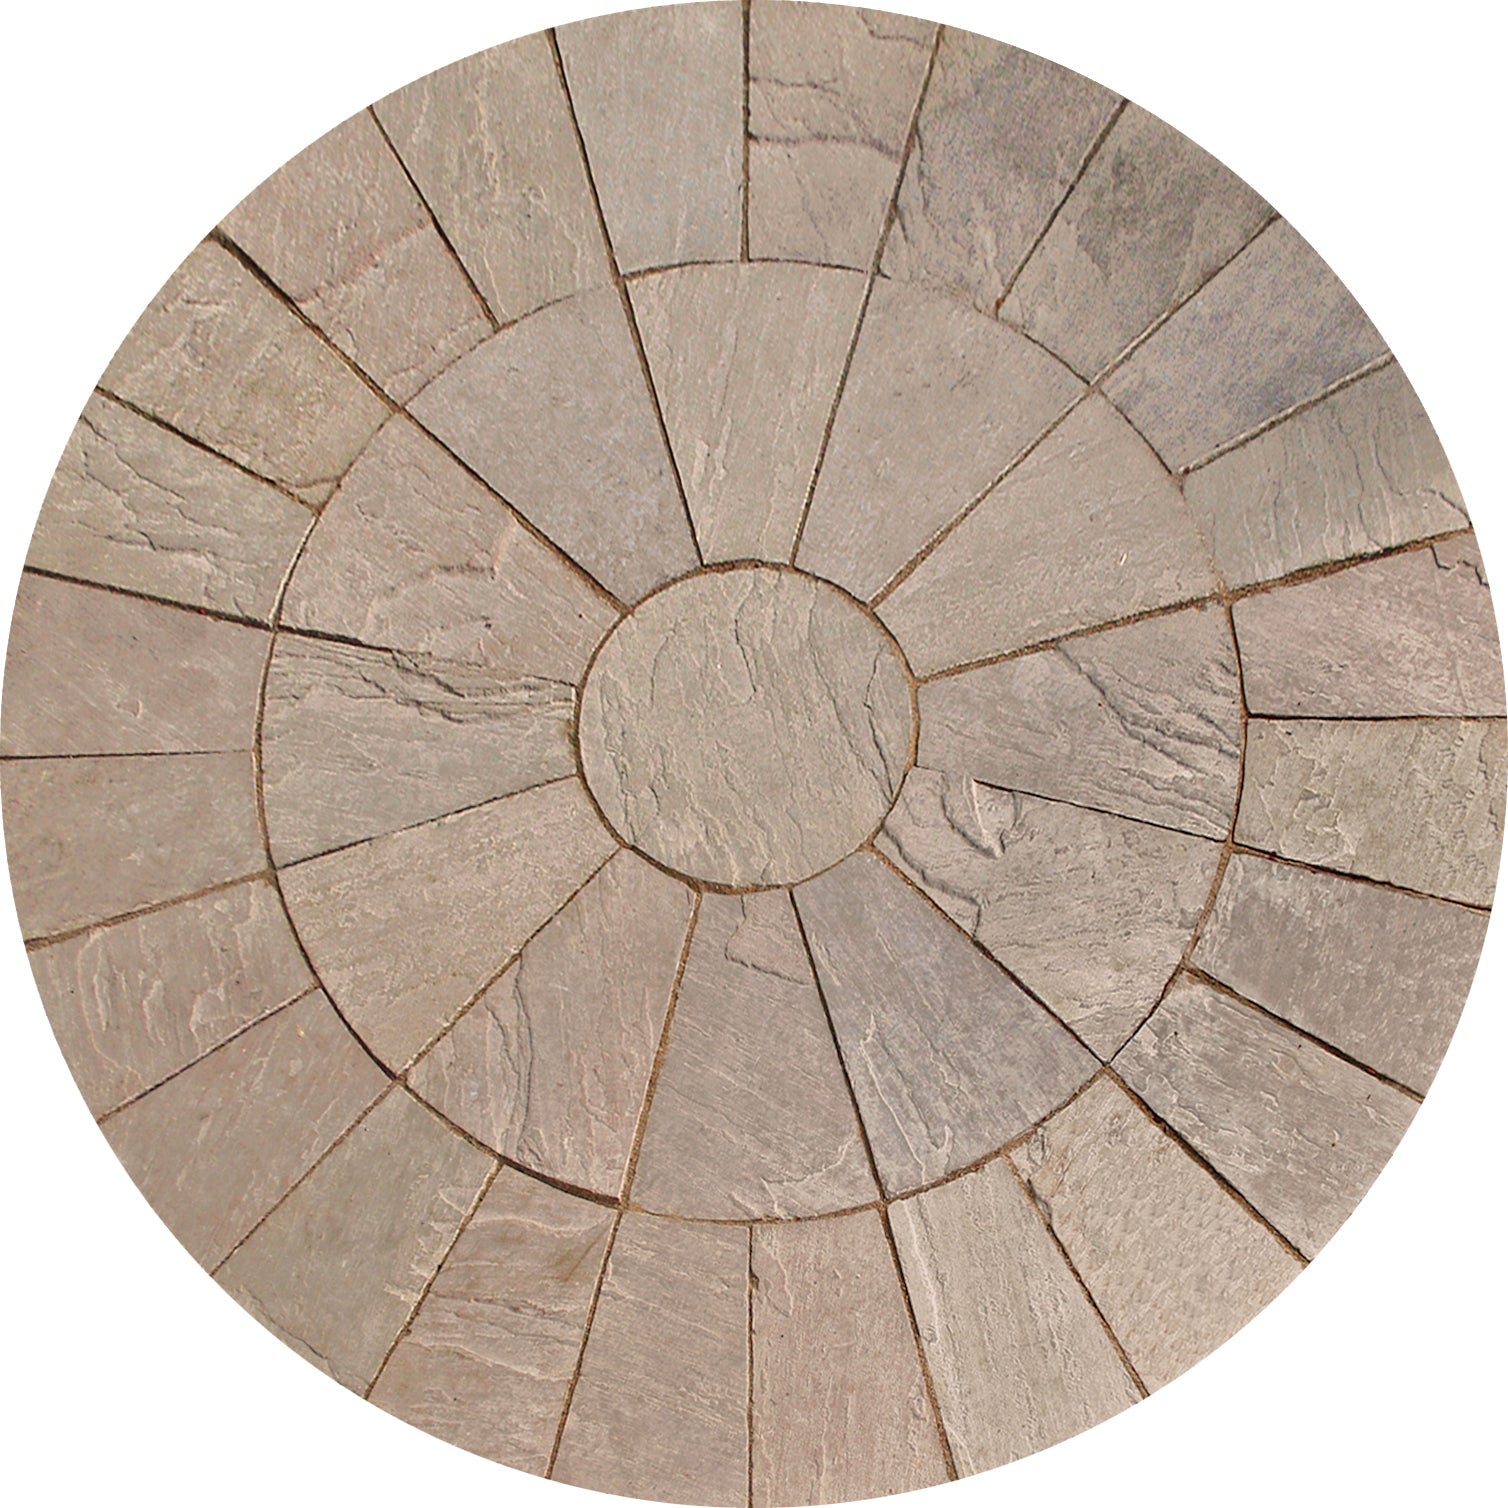 autumn brown natural stone outdoor paver tile large circle pack for patio walkway pool area distributed by surface group manufactured by f and m supply